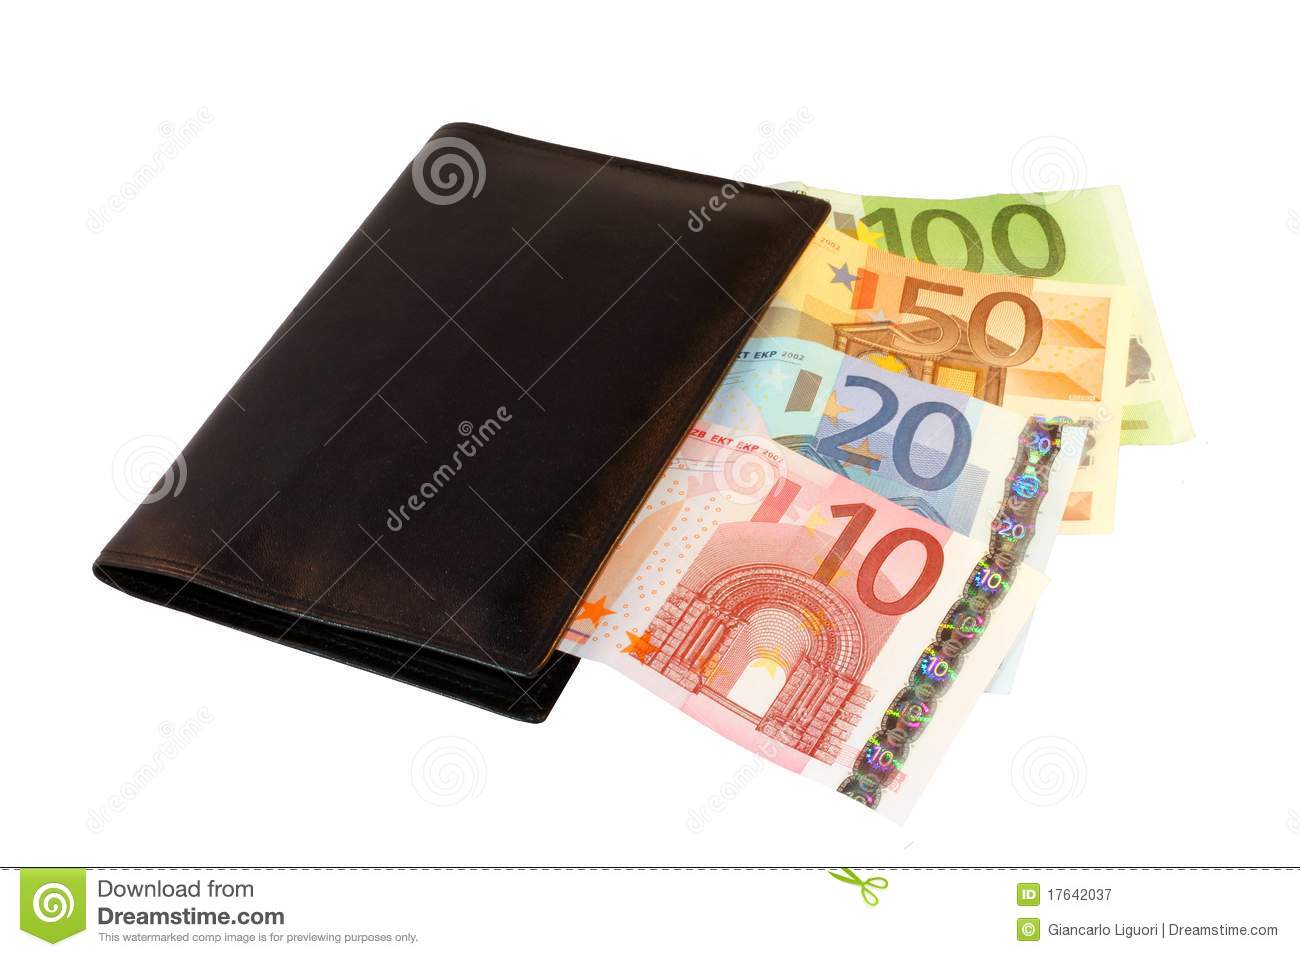 Wallet With Euros Royalty Free Stock Photography   Image  17642037